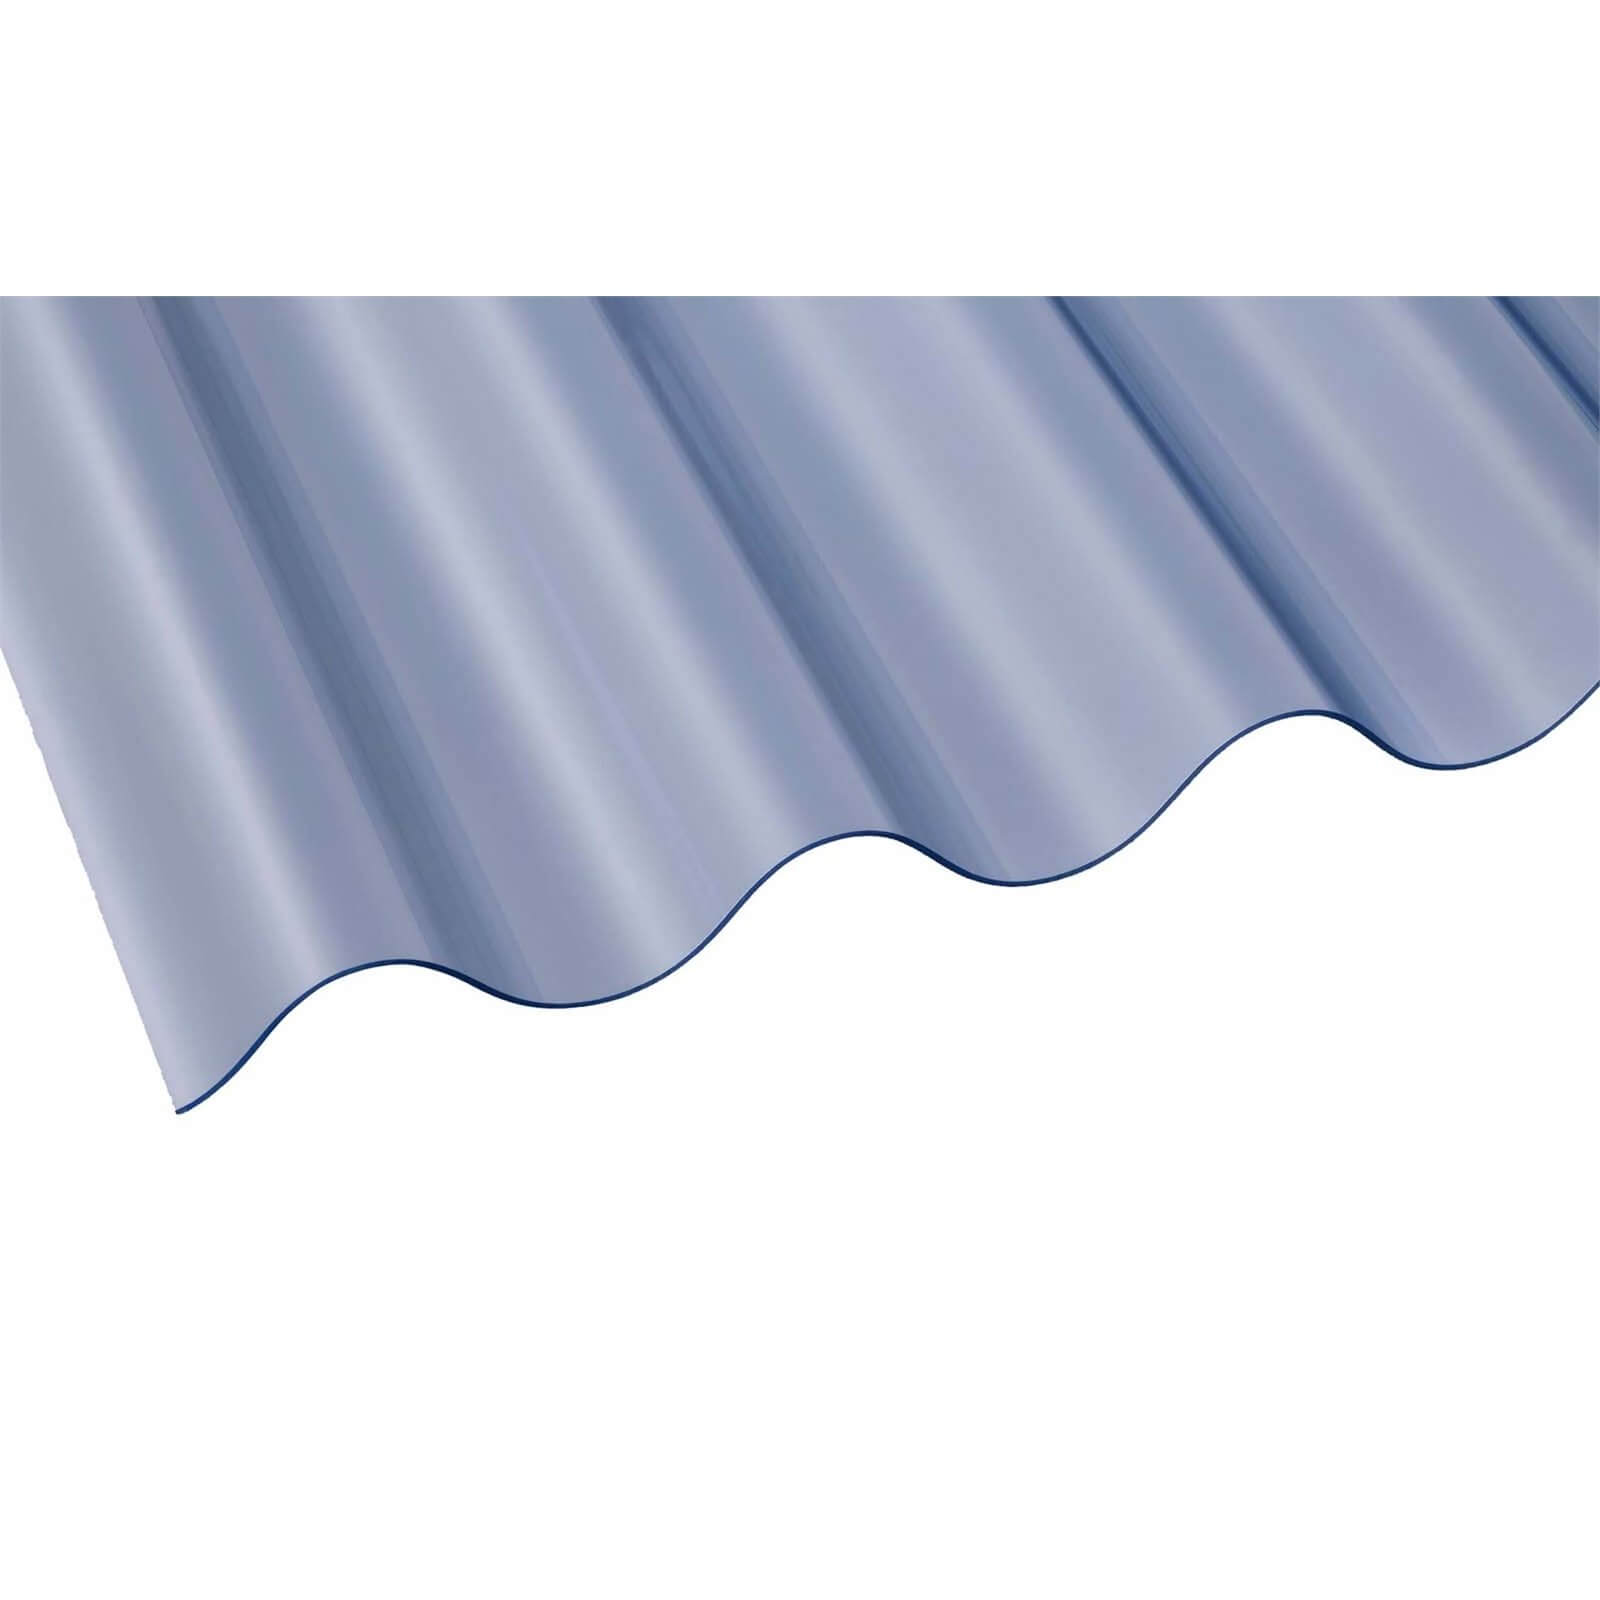 Corolux 3 Inch Profile Corrugated Roof Sheets 8ft â€“ 5 Pack